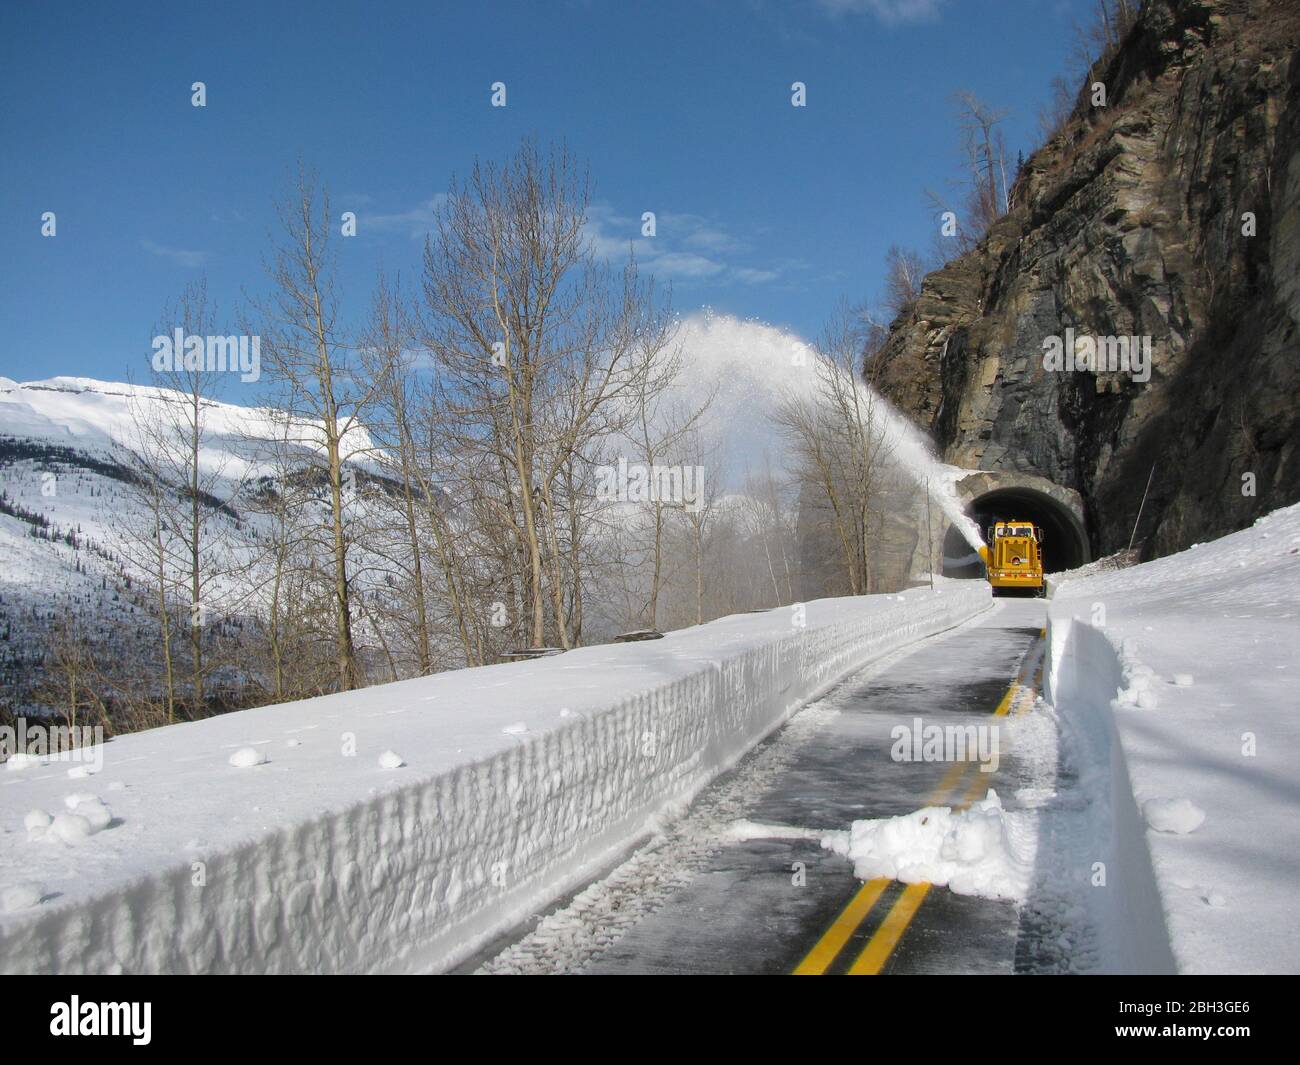 Snow removal equipment at the West Side Tunnel along the winding Going-To-The-Sun road at an elevation of 6,646 feet in Glacier National Park April 14, 2020 in Glacier, Montana. Road clearing continues despite the park being closed to visitors due to the COVID-19, coronavirus pandemic. Stock Photo